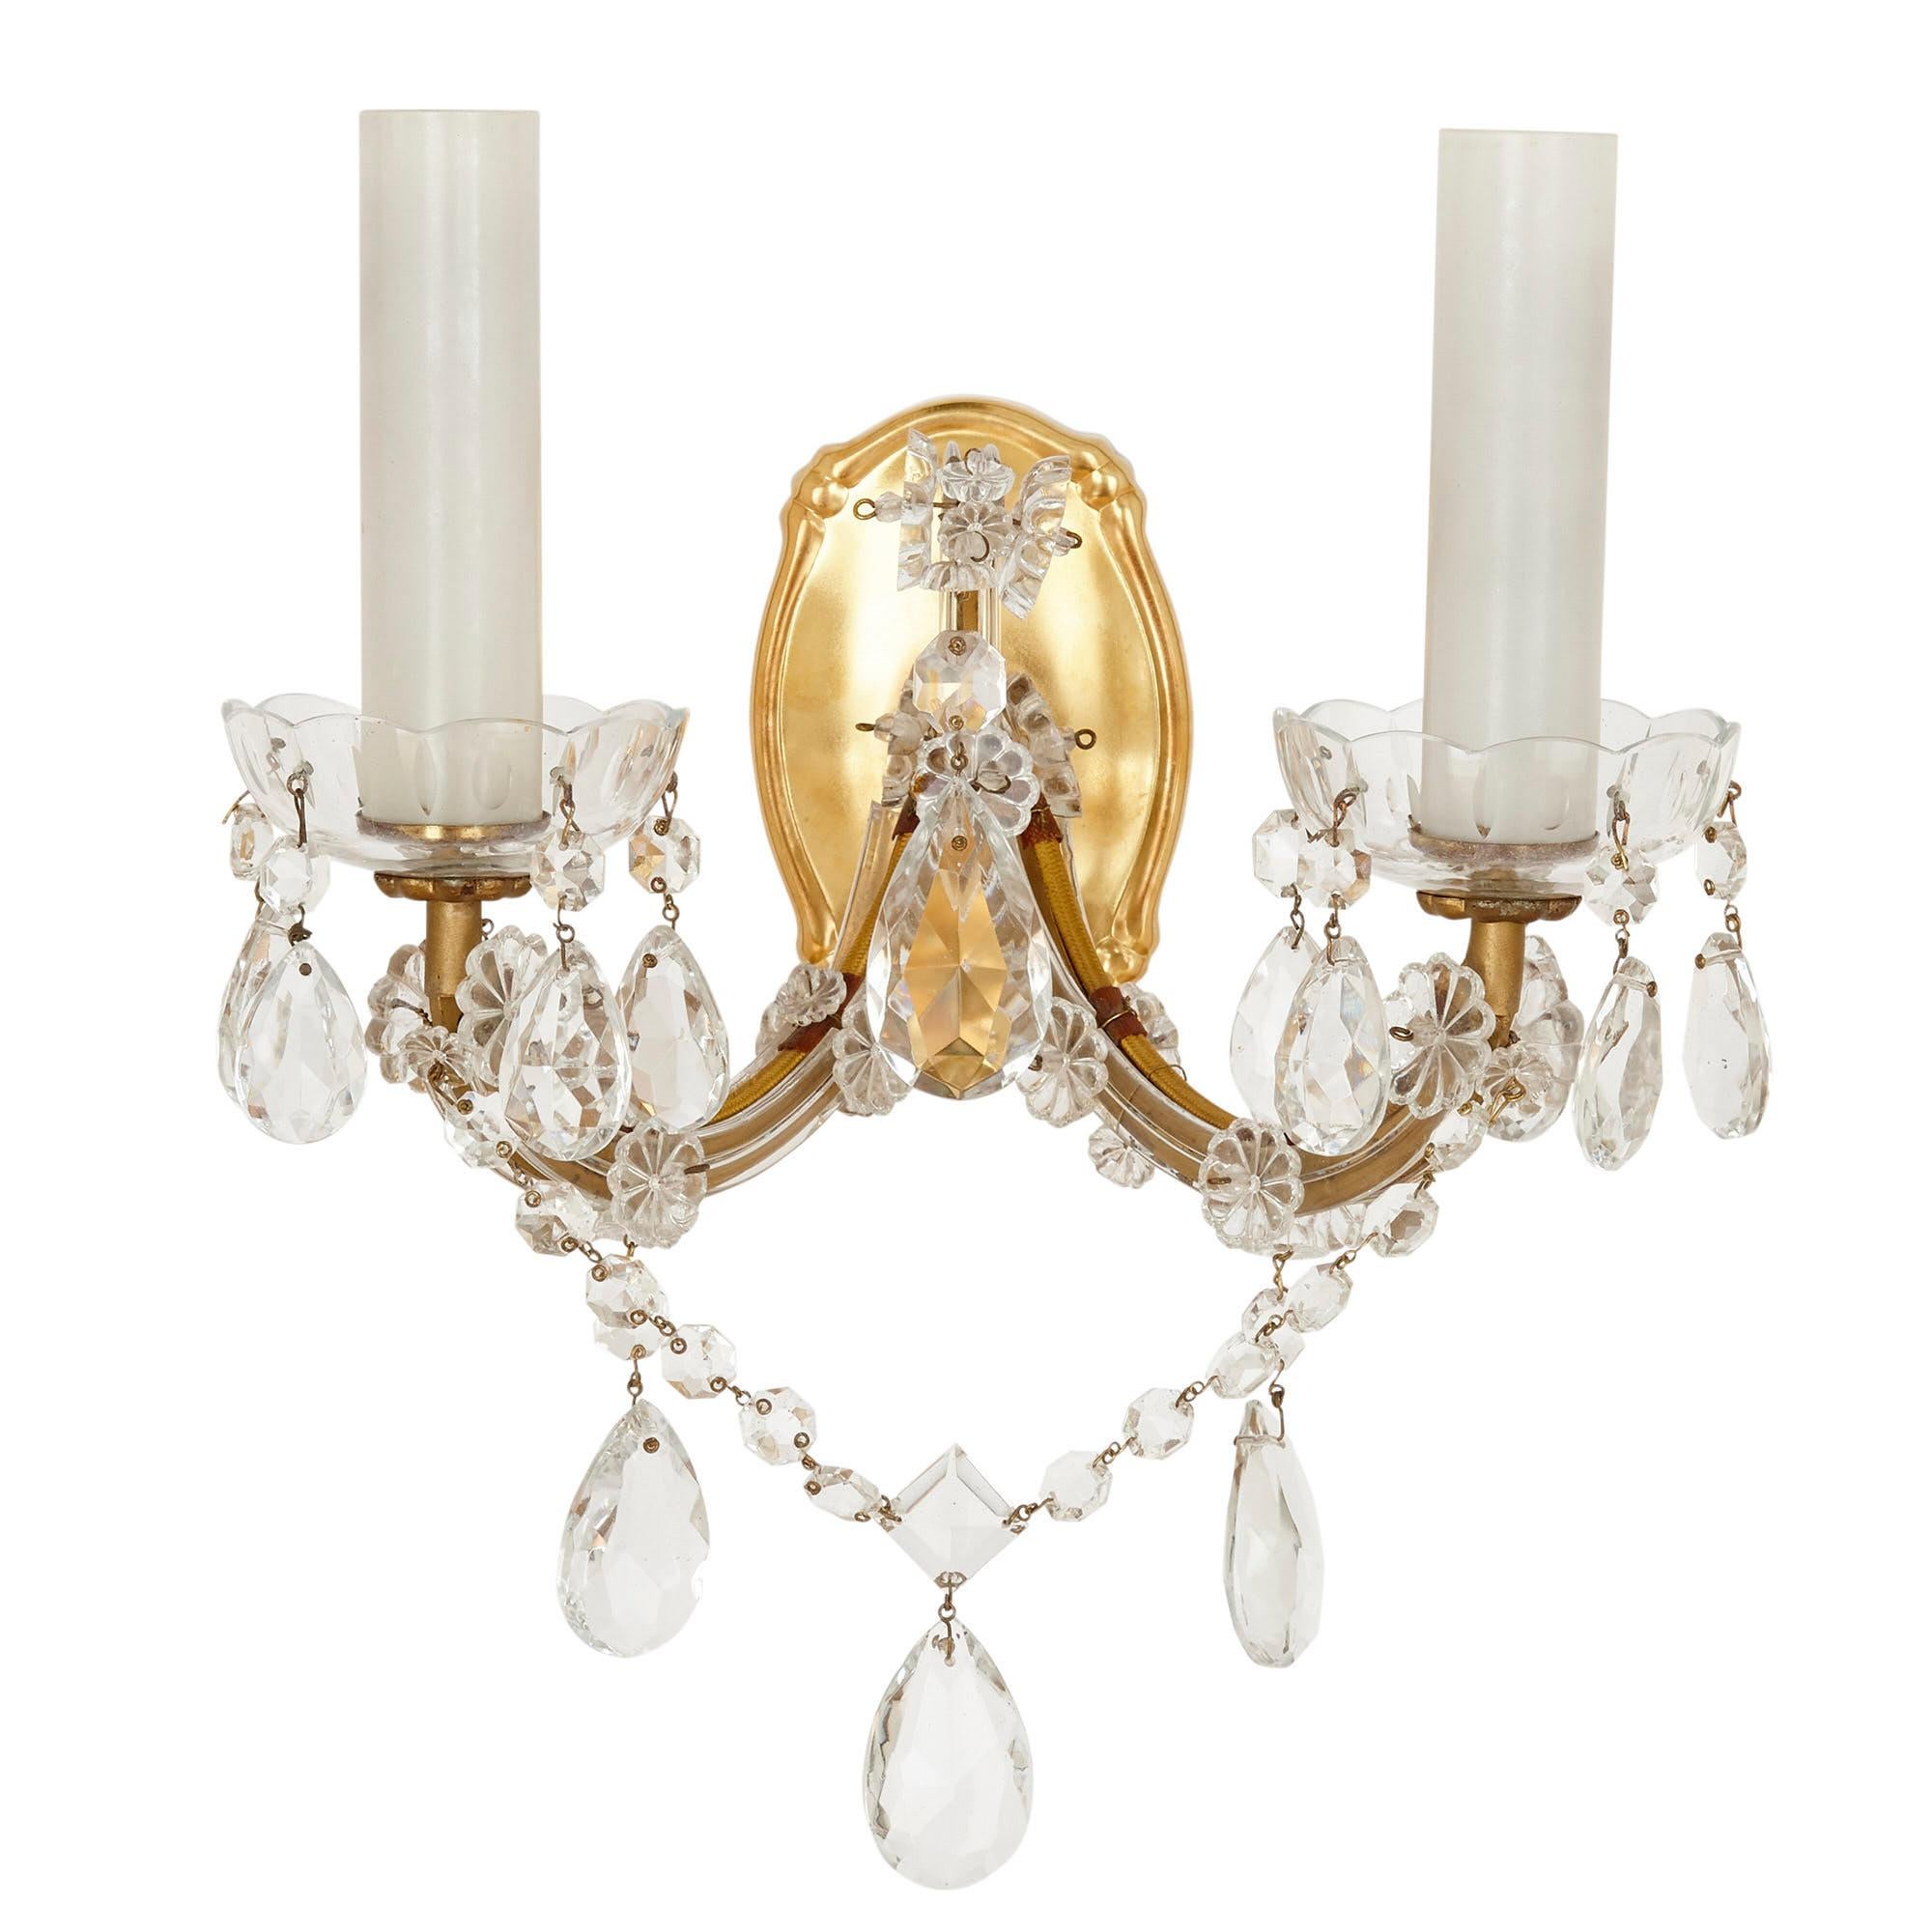 Set of four gilt bronze and Bohemian glass sconces
Bohemian, 20th century
Measures: Height 21cm, width 27cm, depth 19cm

The sconces in this set are crafted from gilt bronze and cut glass. Each sconce features a shaped gilt bronze back plate